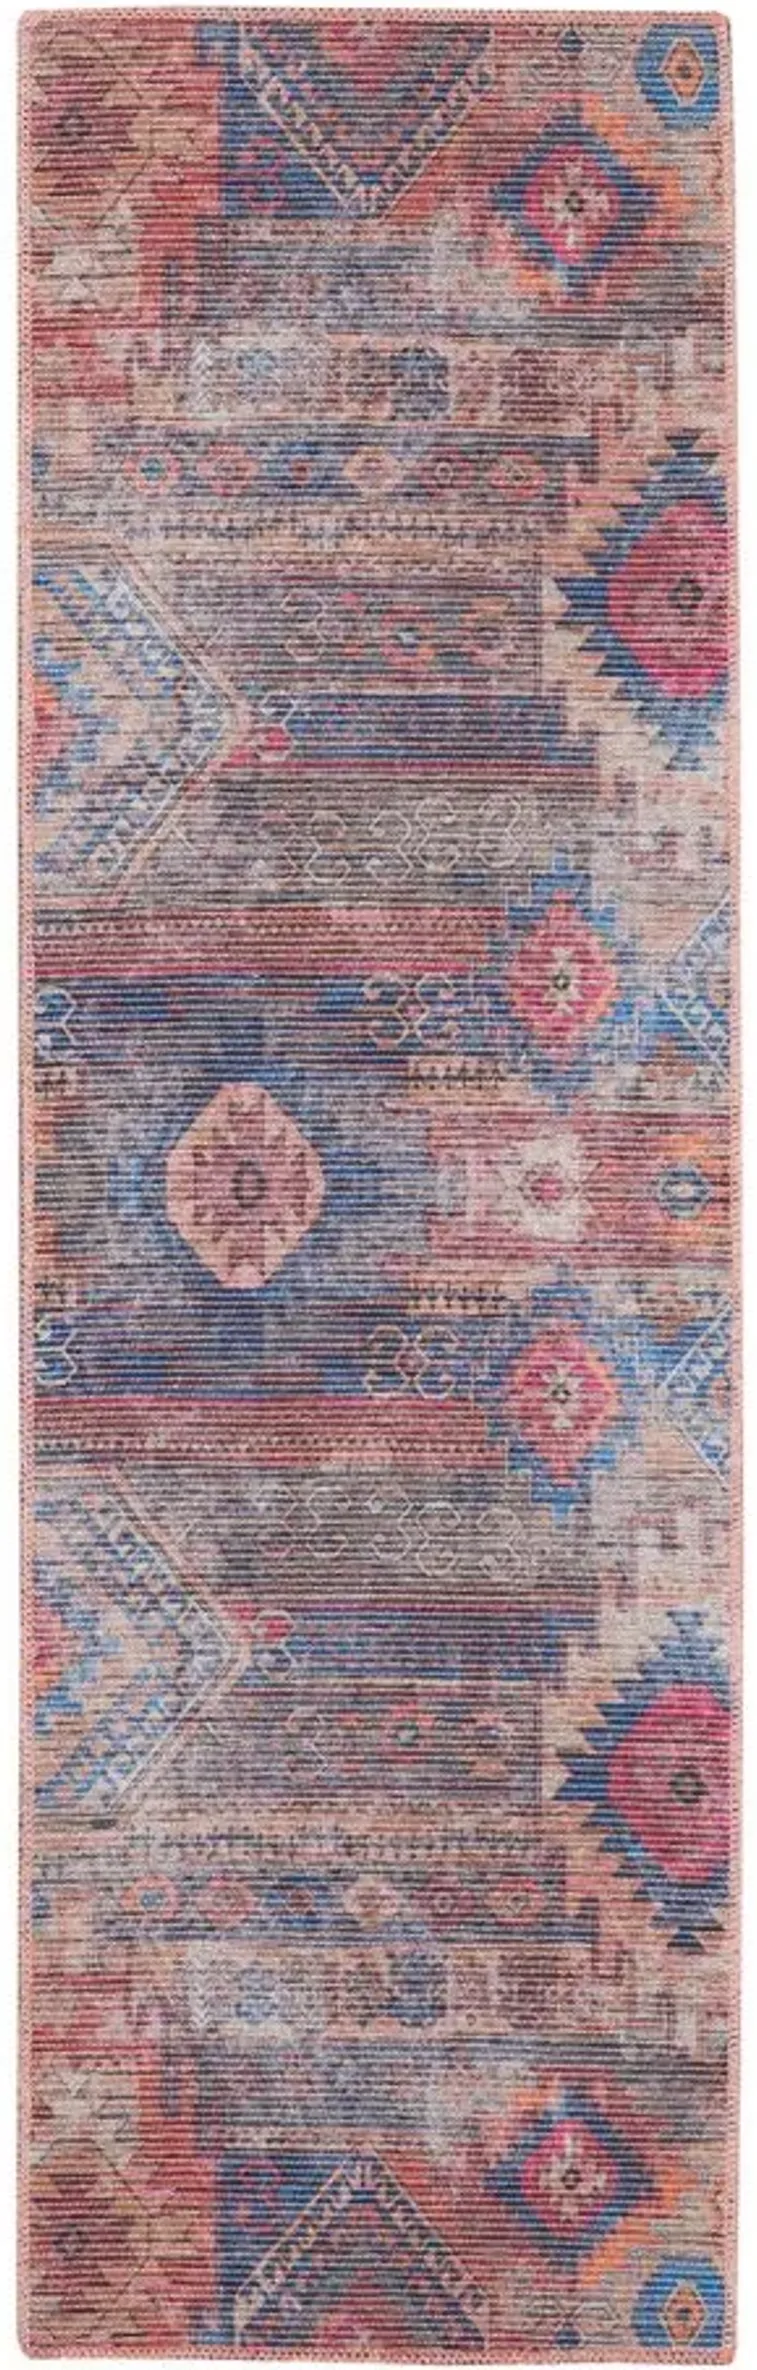 Nicole Curtis Alamos Runner Rug in Multi by Nourison